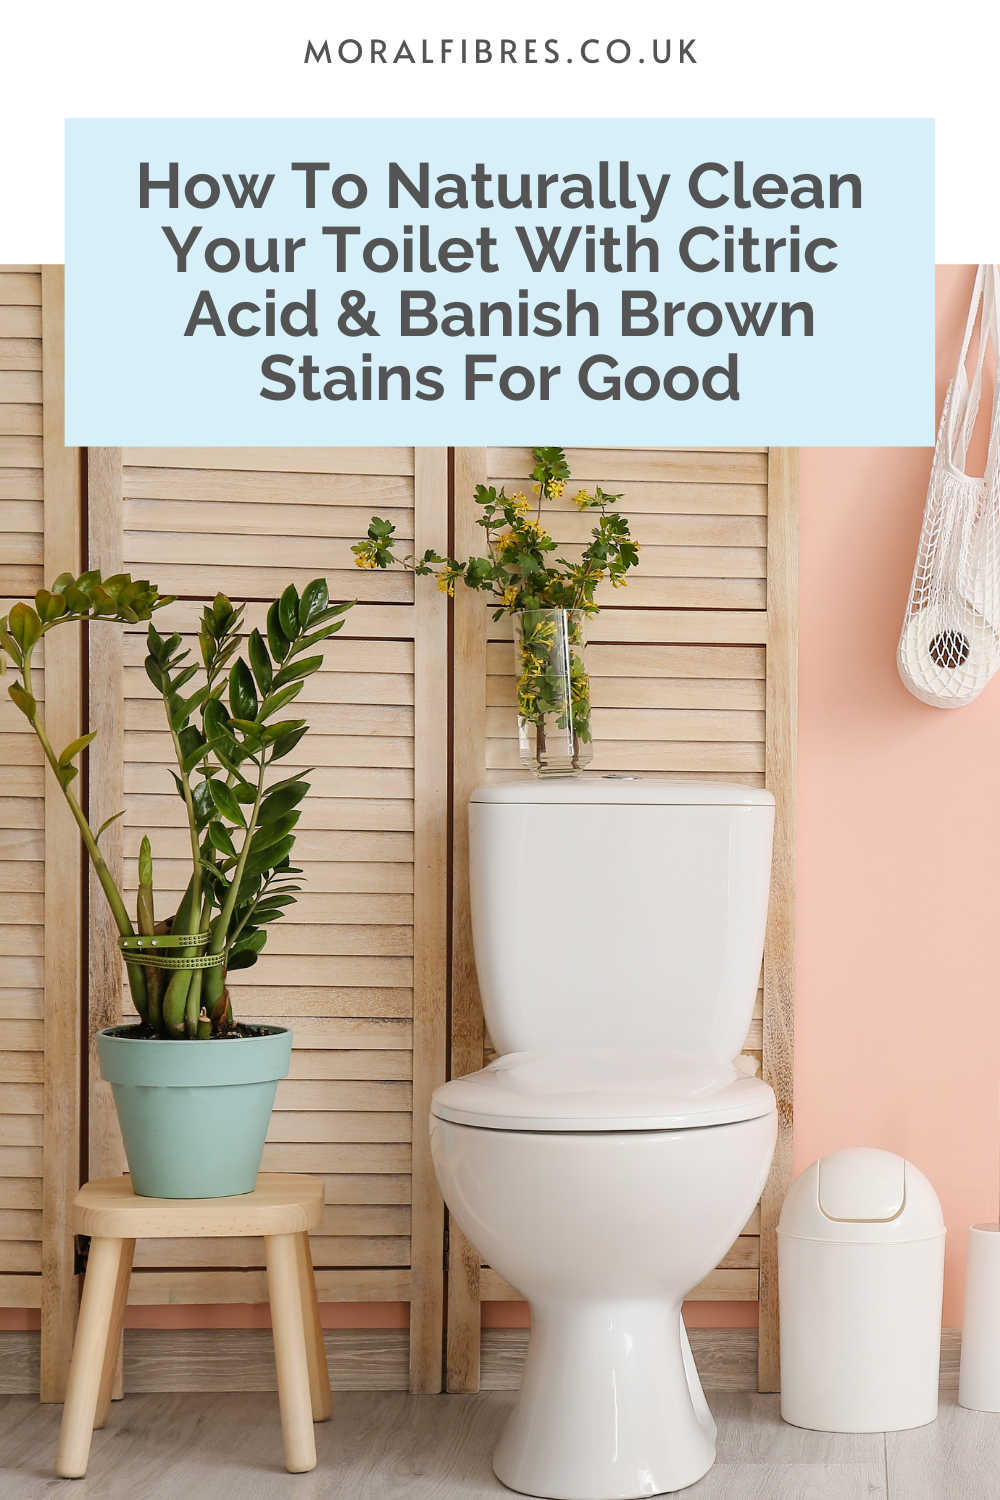 How To Clean Your Toilet With Citric Acid To Remove Brown Stains